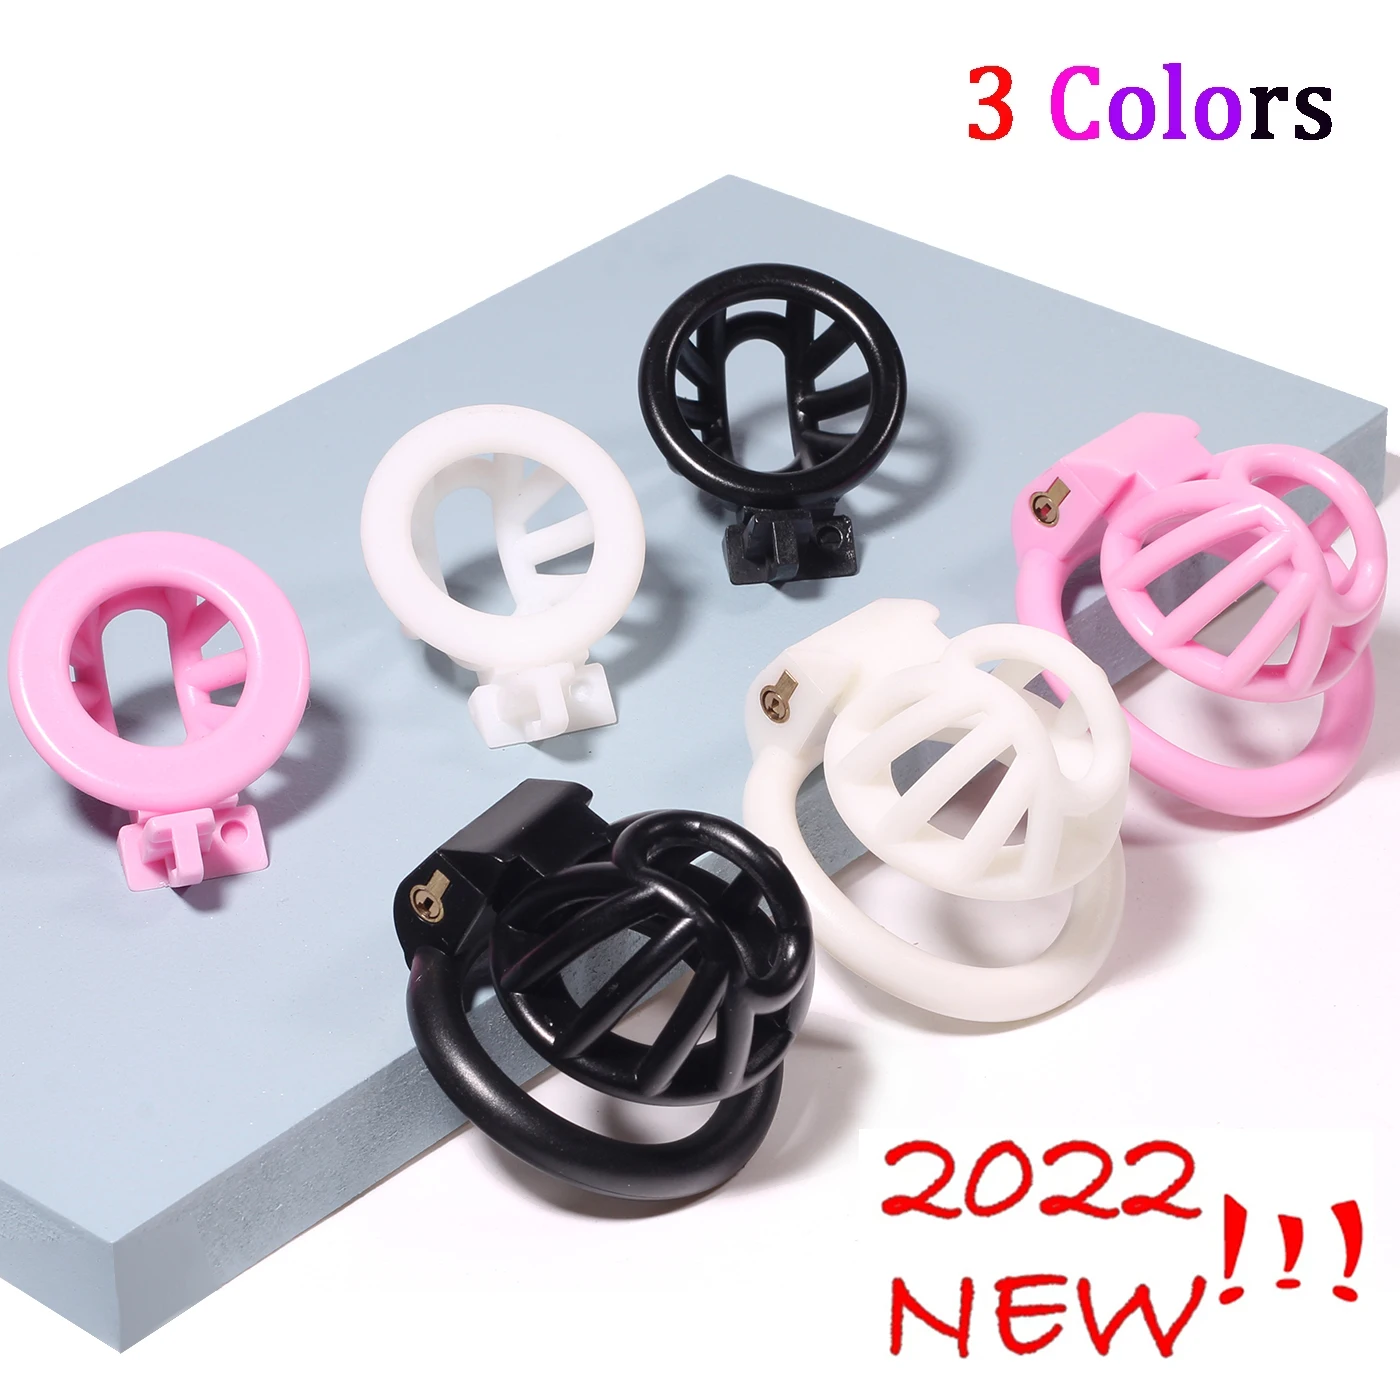 

2022 New Male Chastity Cage Cock Cage Locked In Lust Male Chastity Device Sissy Chastity Cage With 4 Base Ring Sex Toys For Men